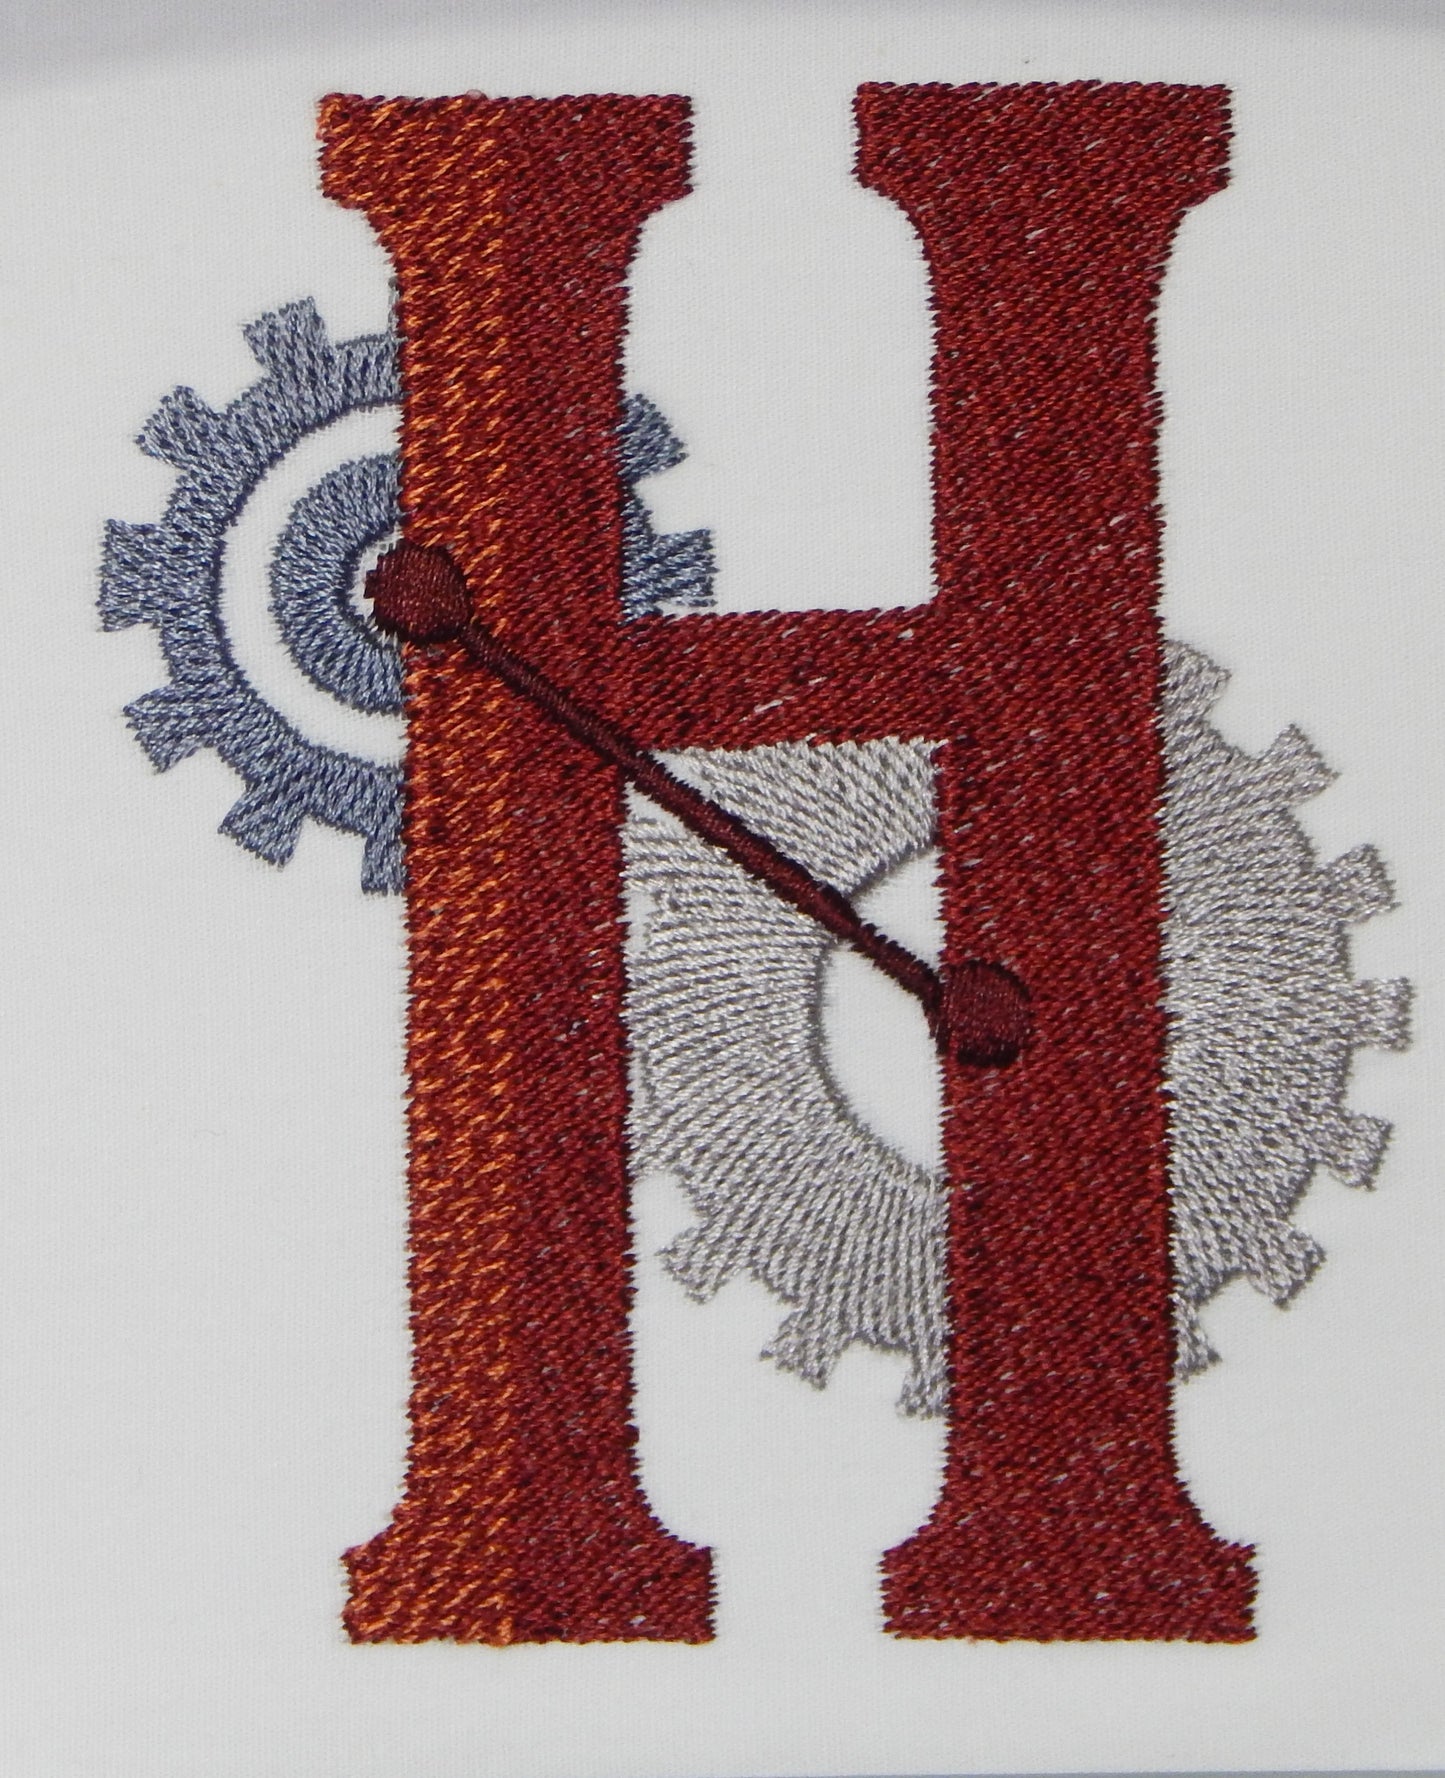 Steampunk Letters and Numbers [4x4] 11816 Machine Embroidery Designs